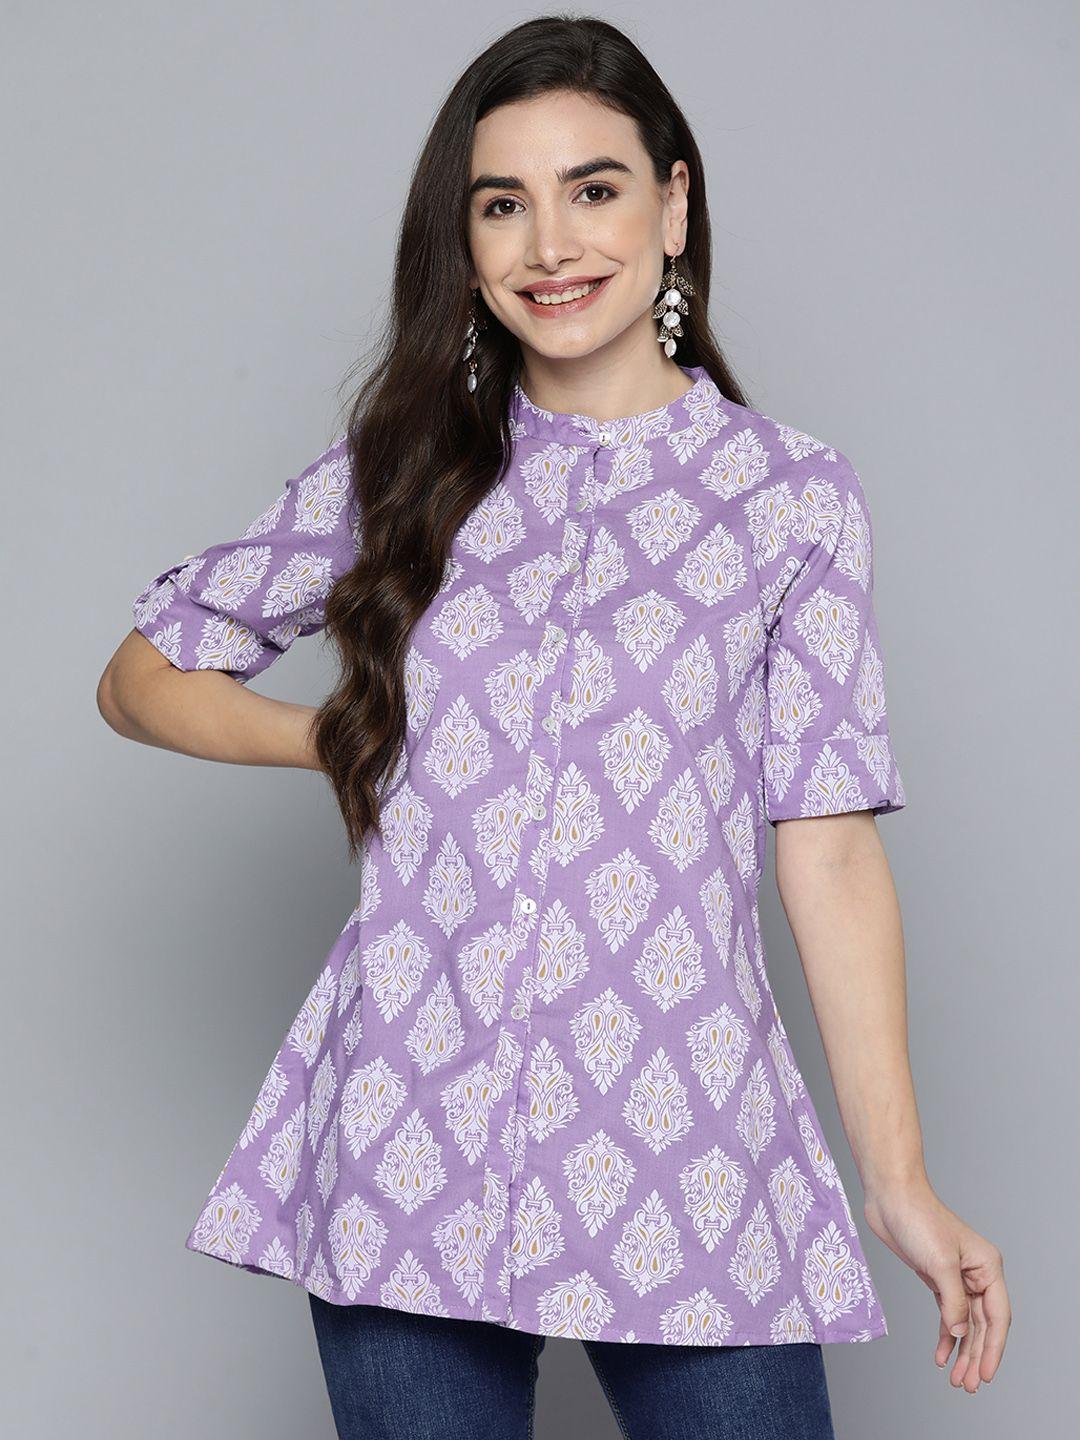 here&now violet & white ethnic motifs printed pure cotton kurti